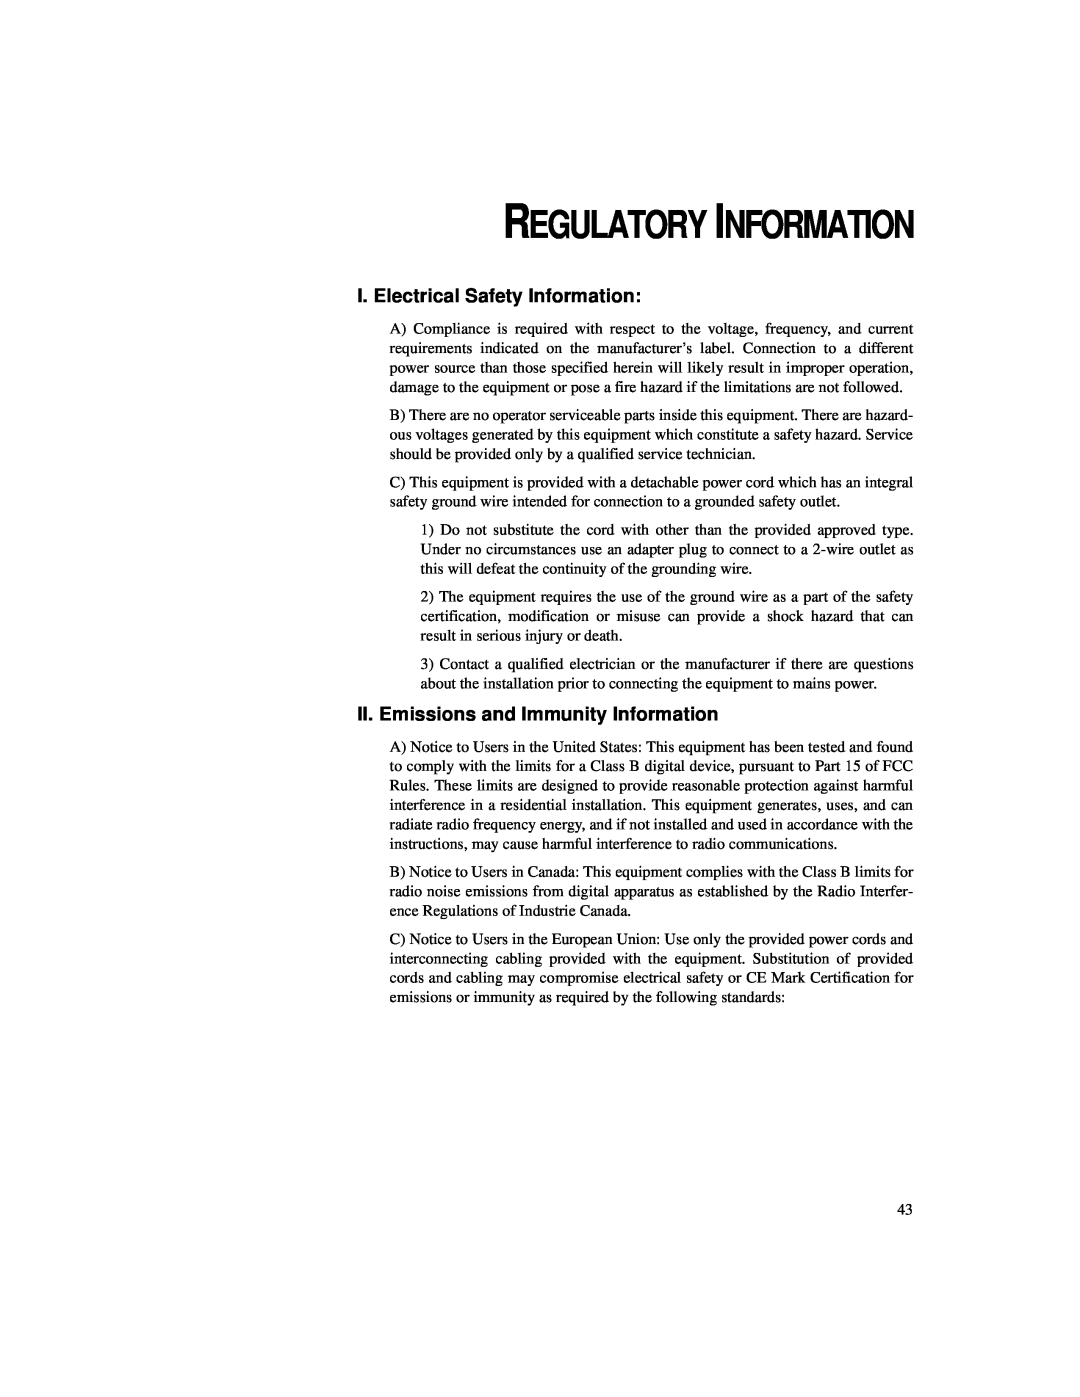 Elo TouchSystems 1525L Regulatory Information, I. Electrical Safety Information, II. Emissions and Immunity Information 